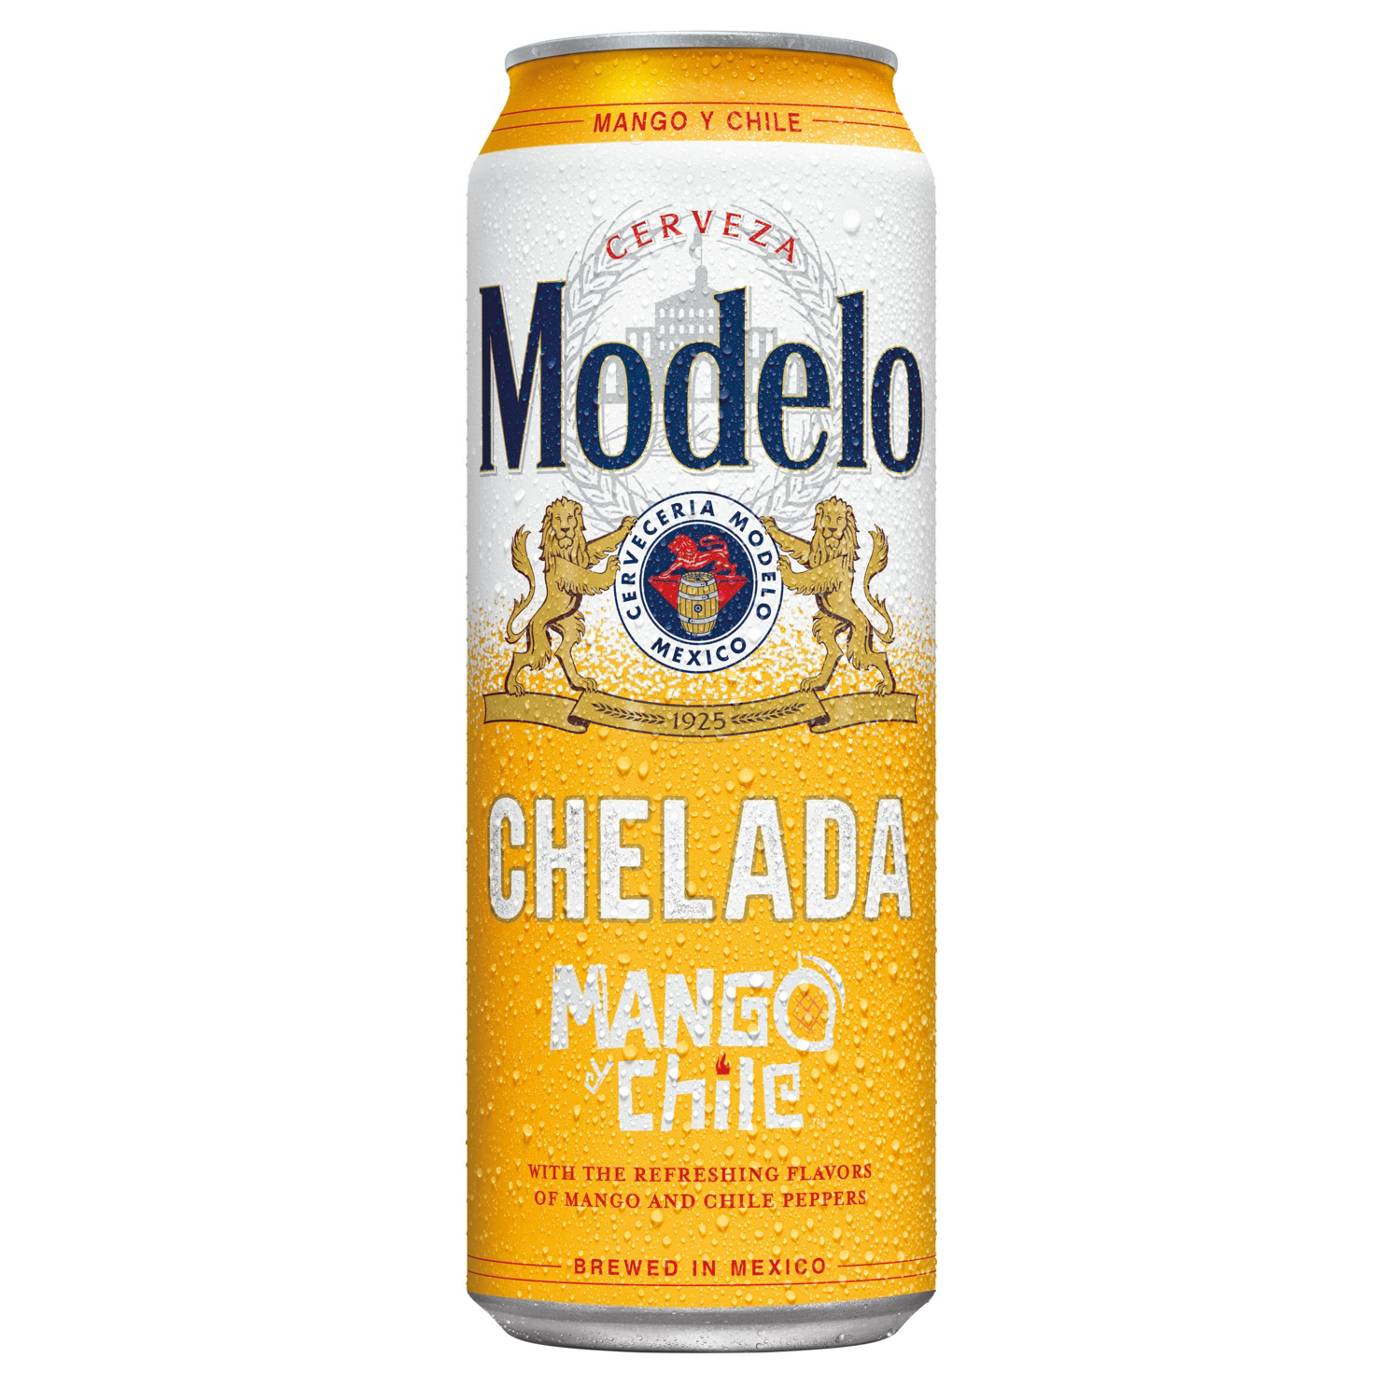 Modelo Chelada Mango y Chile Mexican Import Flavored Beer 24 oz Can; image 1 of 9